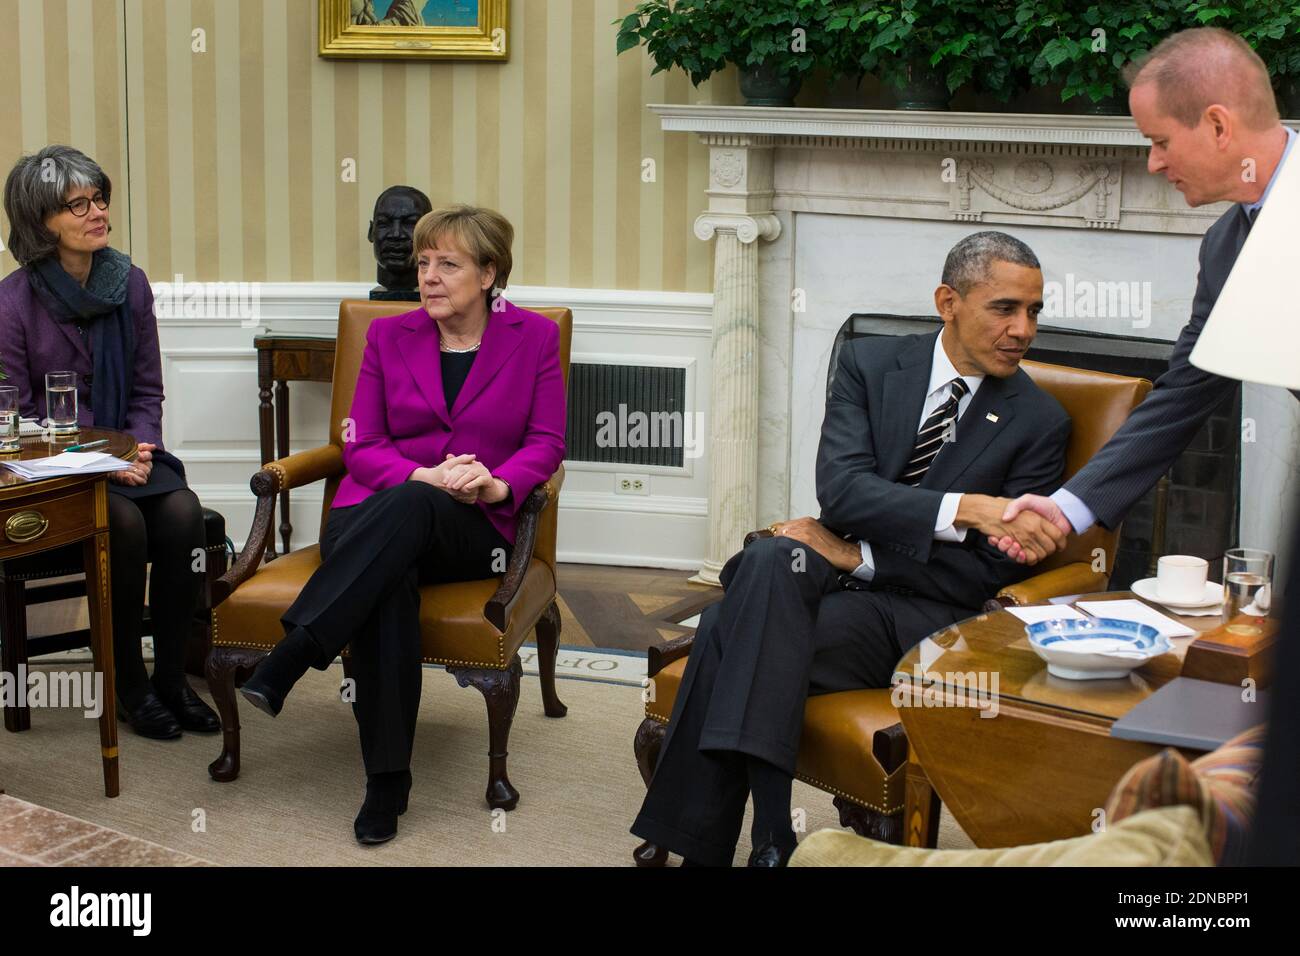 US President Barack Obama (C-R) and German Chancellor Angela Merkel (C-L) prepare for a meeting in the Oval Office of the White House in Washington, DC, USA, 09 February 2015. The two are set to discuss the continuing crisis in Ukraine; Chancellor Merkel is opposed to arming Ukraine in their fight against Russian separatists. A growing number of US lawmakers, however, strongly favor the idea. Photo by Jim Lo Scalzo/Pool/ABACAPRESS.COM Stock Photo